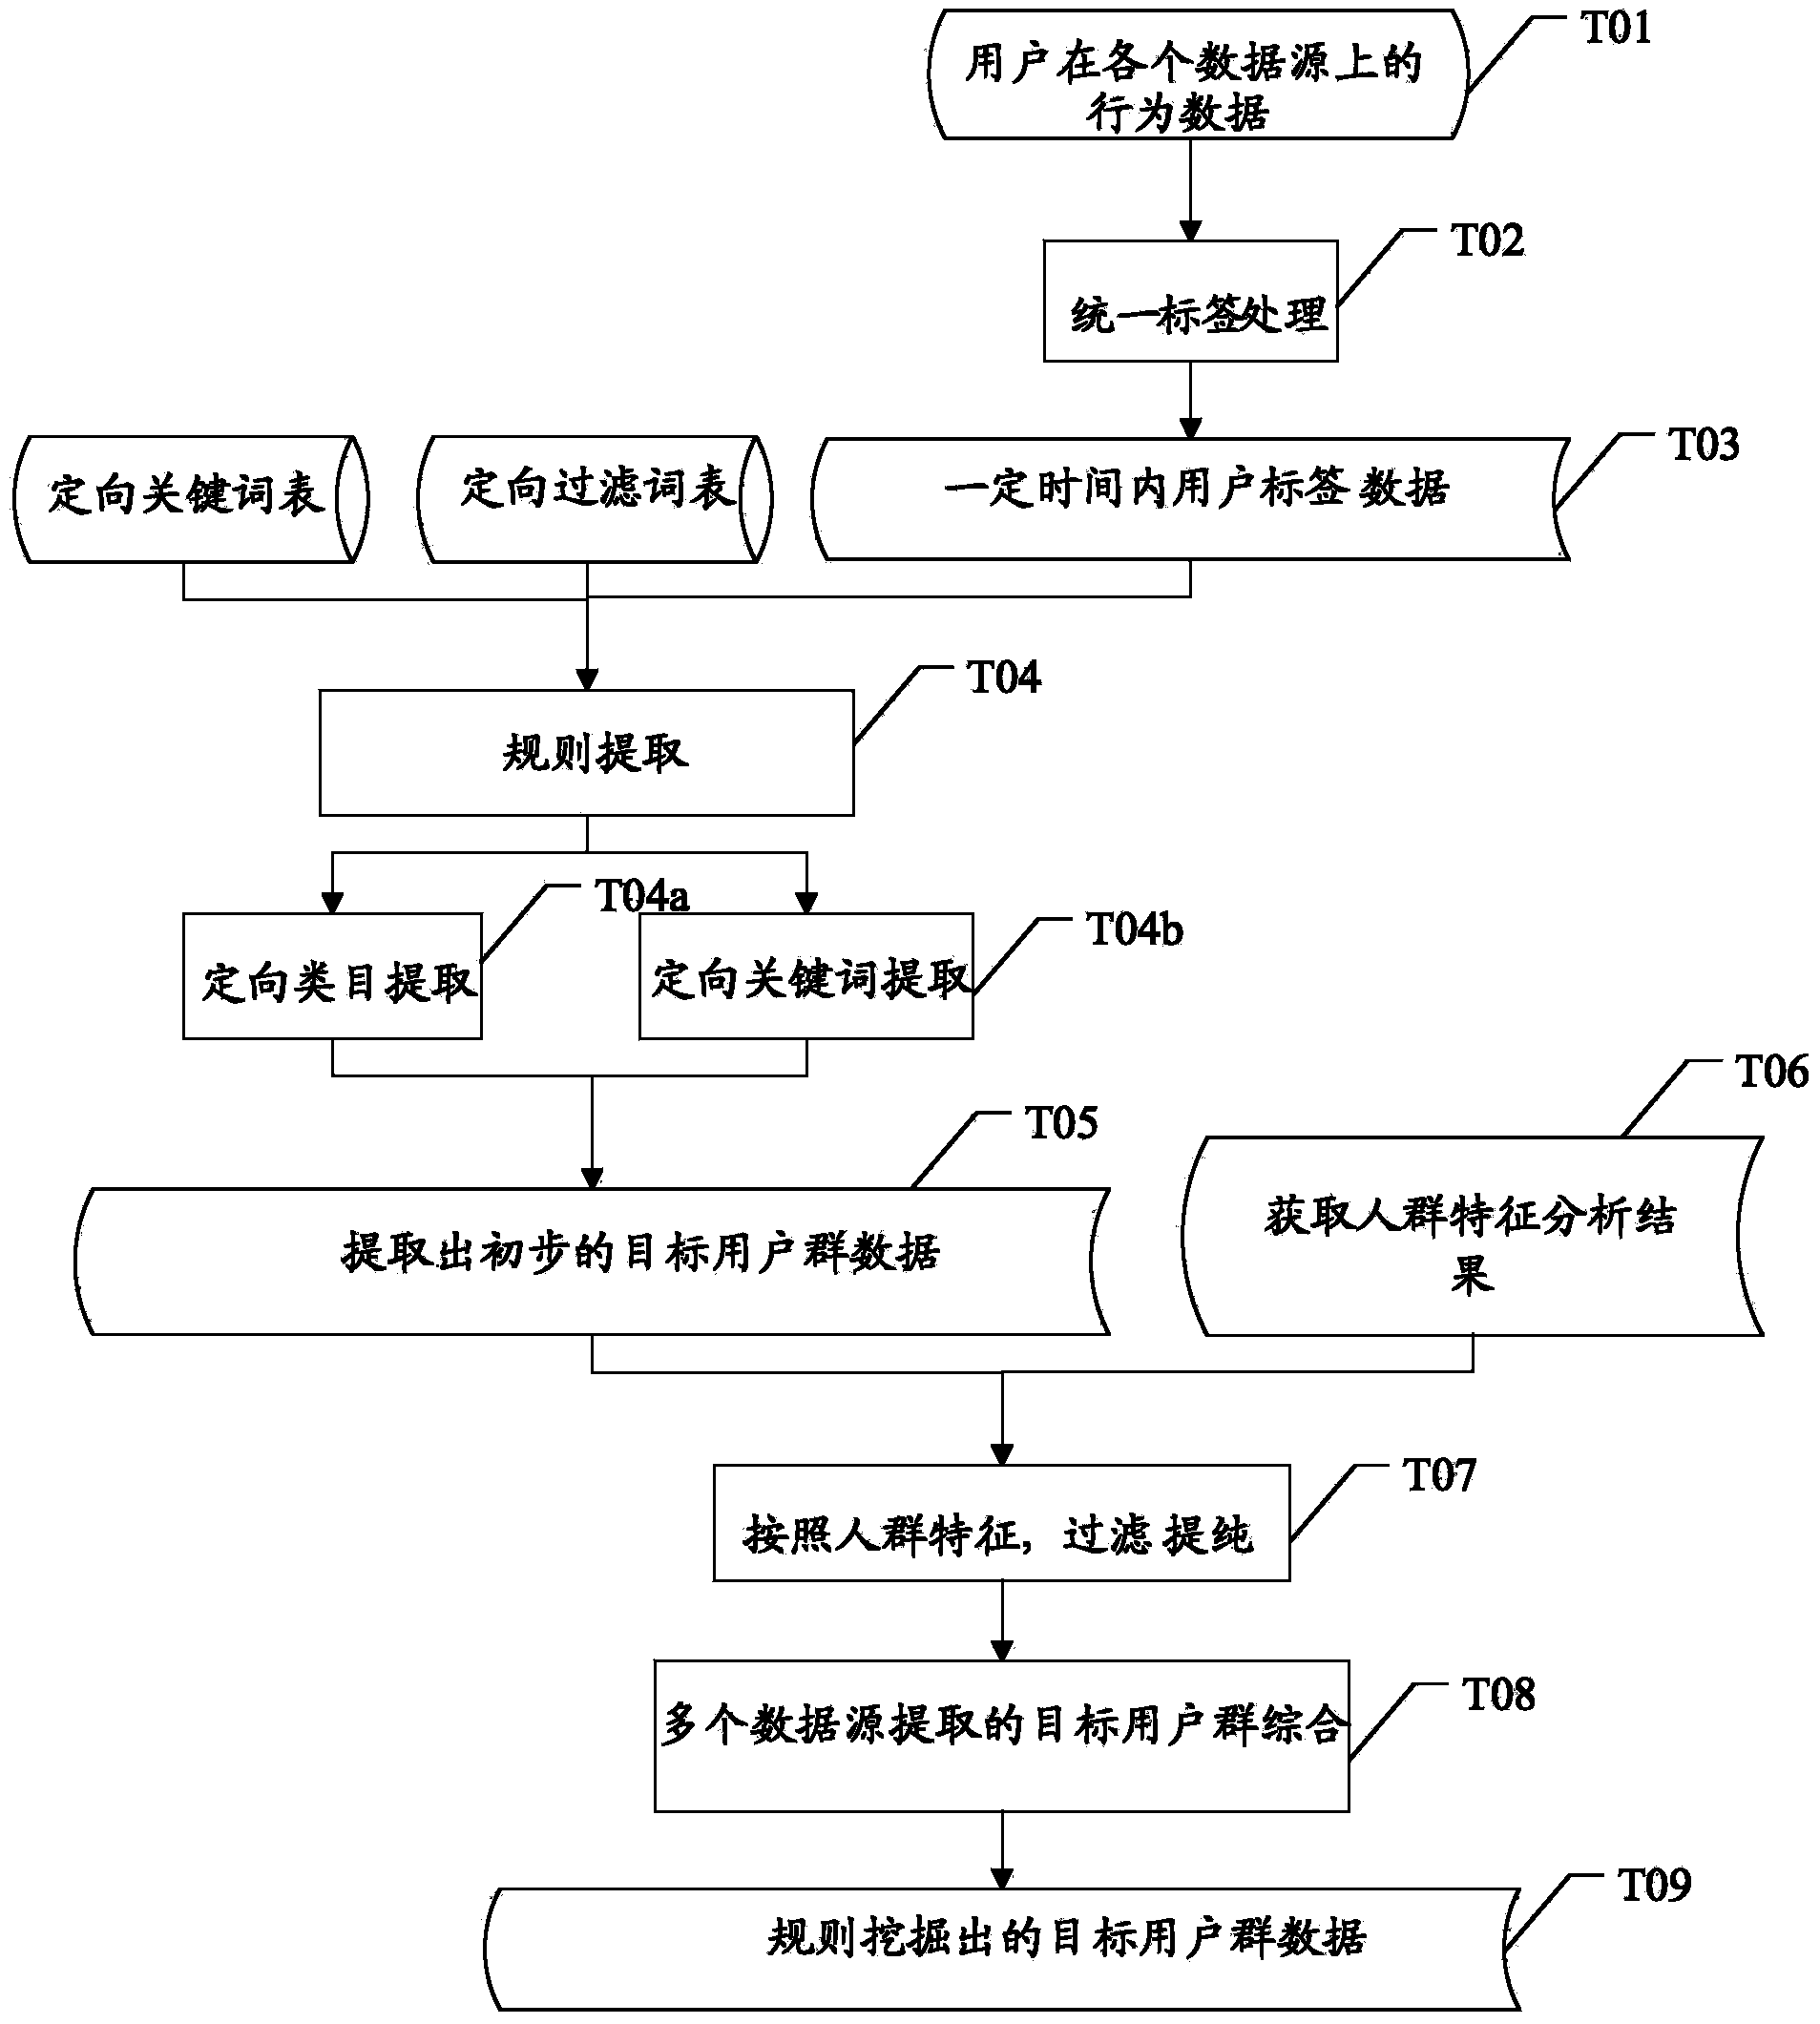 Method and device for analyzing user behavior data